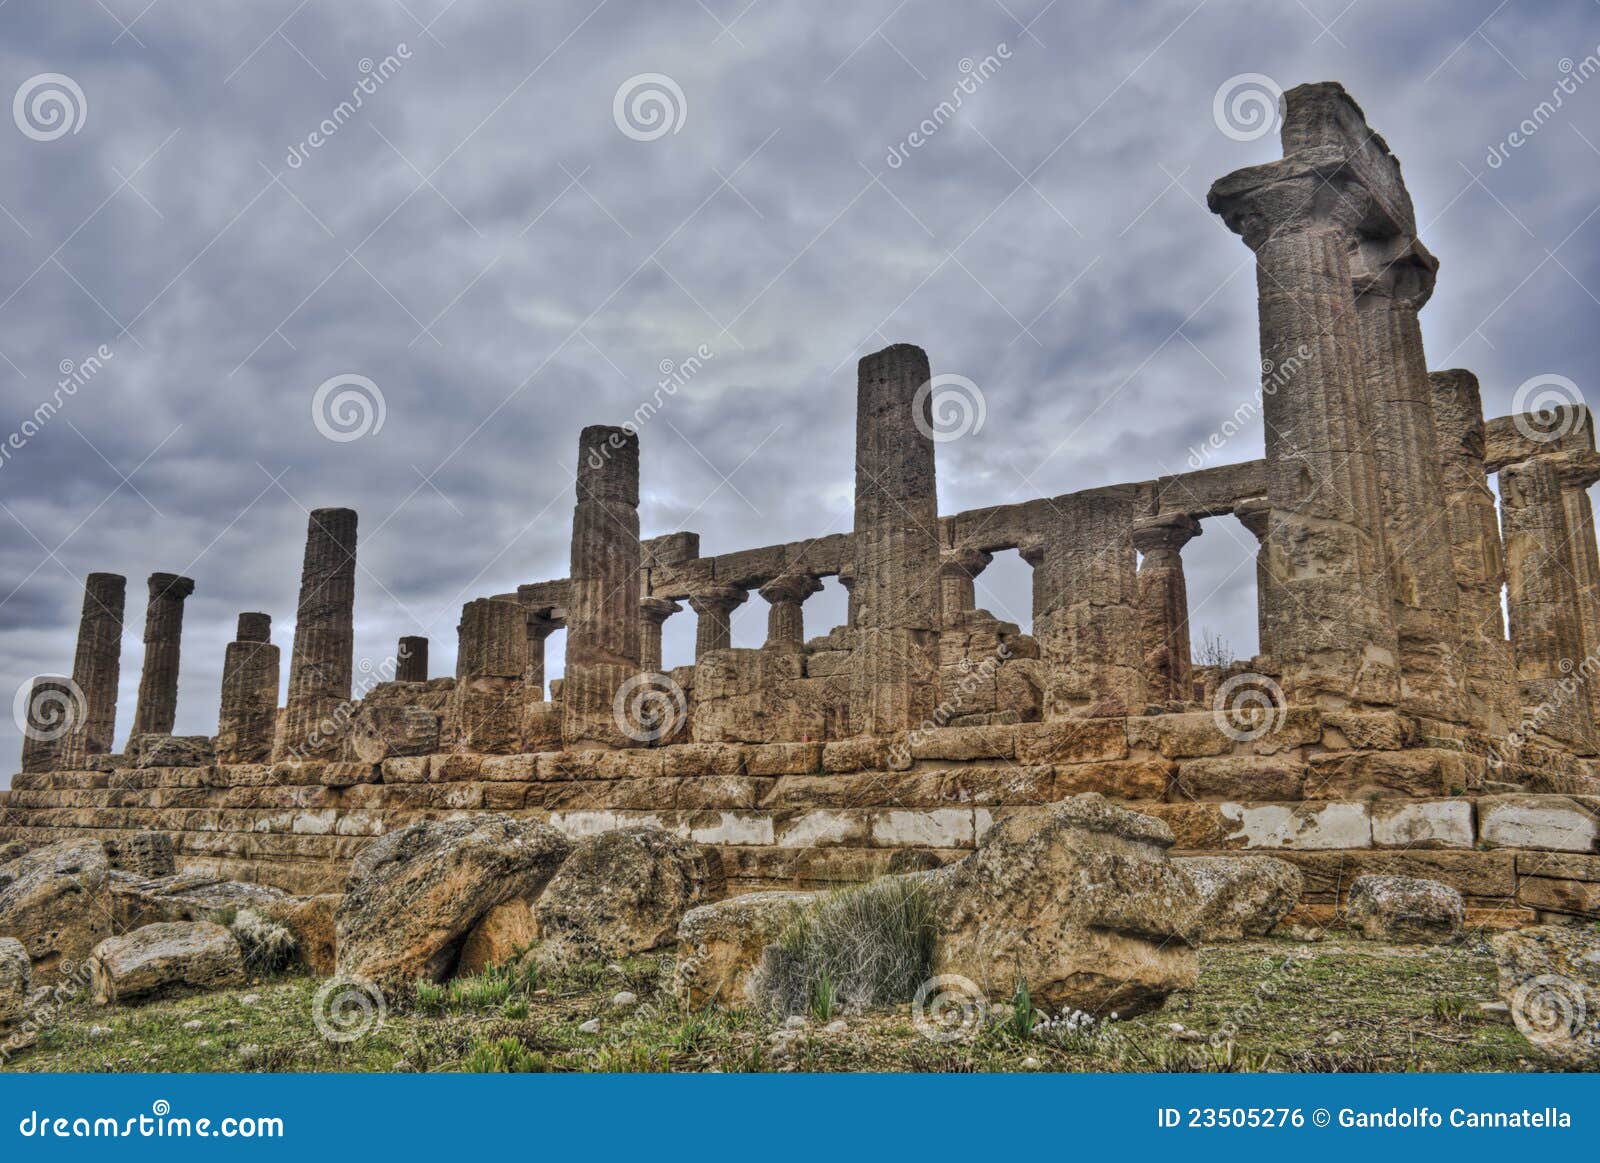 greek temple of agrigento in hdr